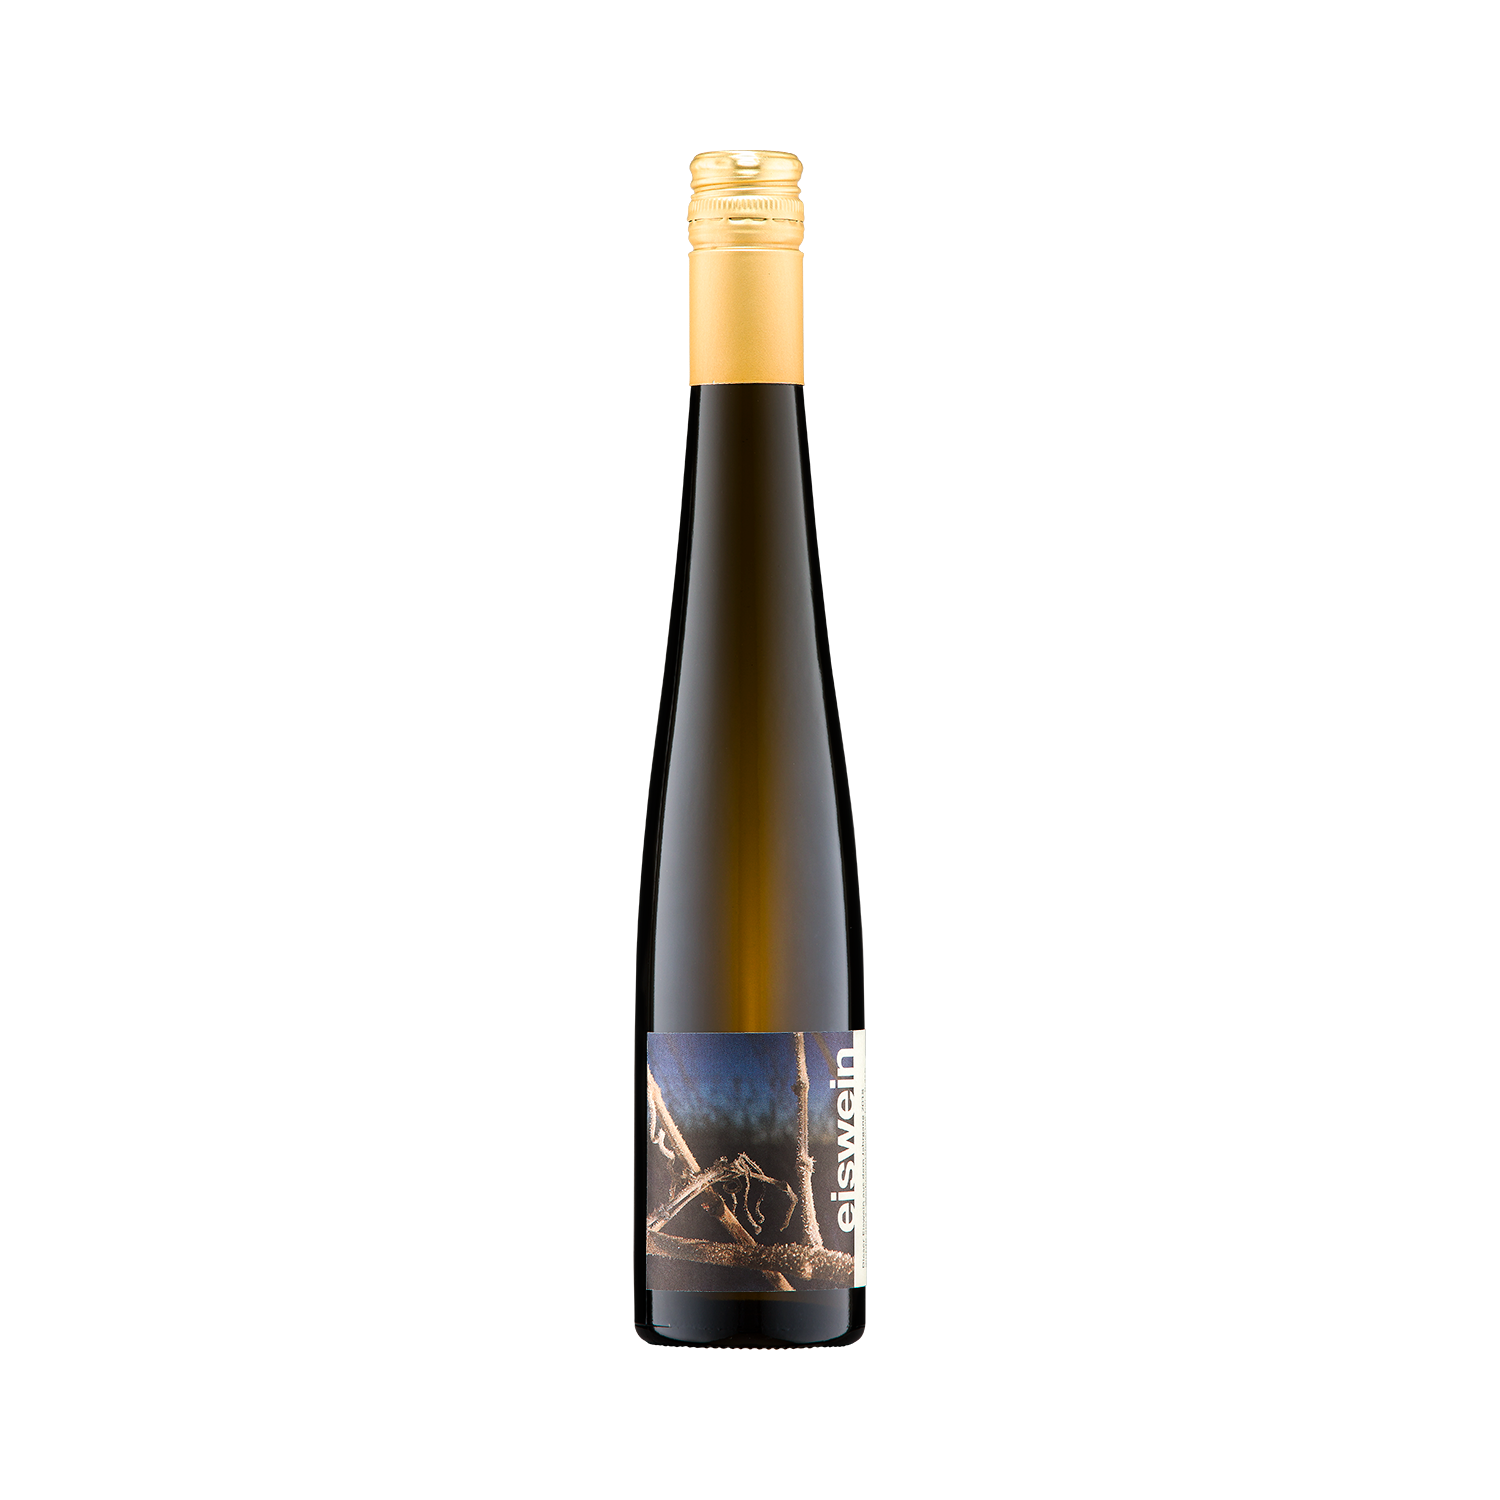 2018 RIESLING EISWEIN 